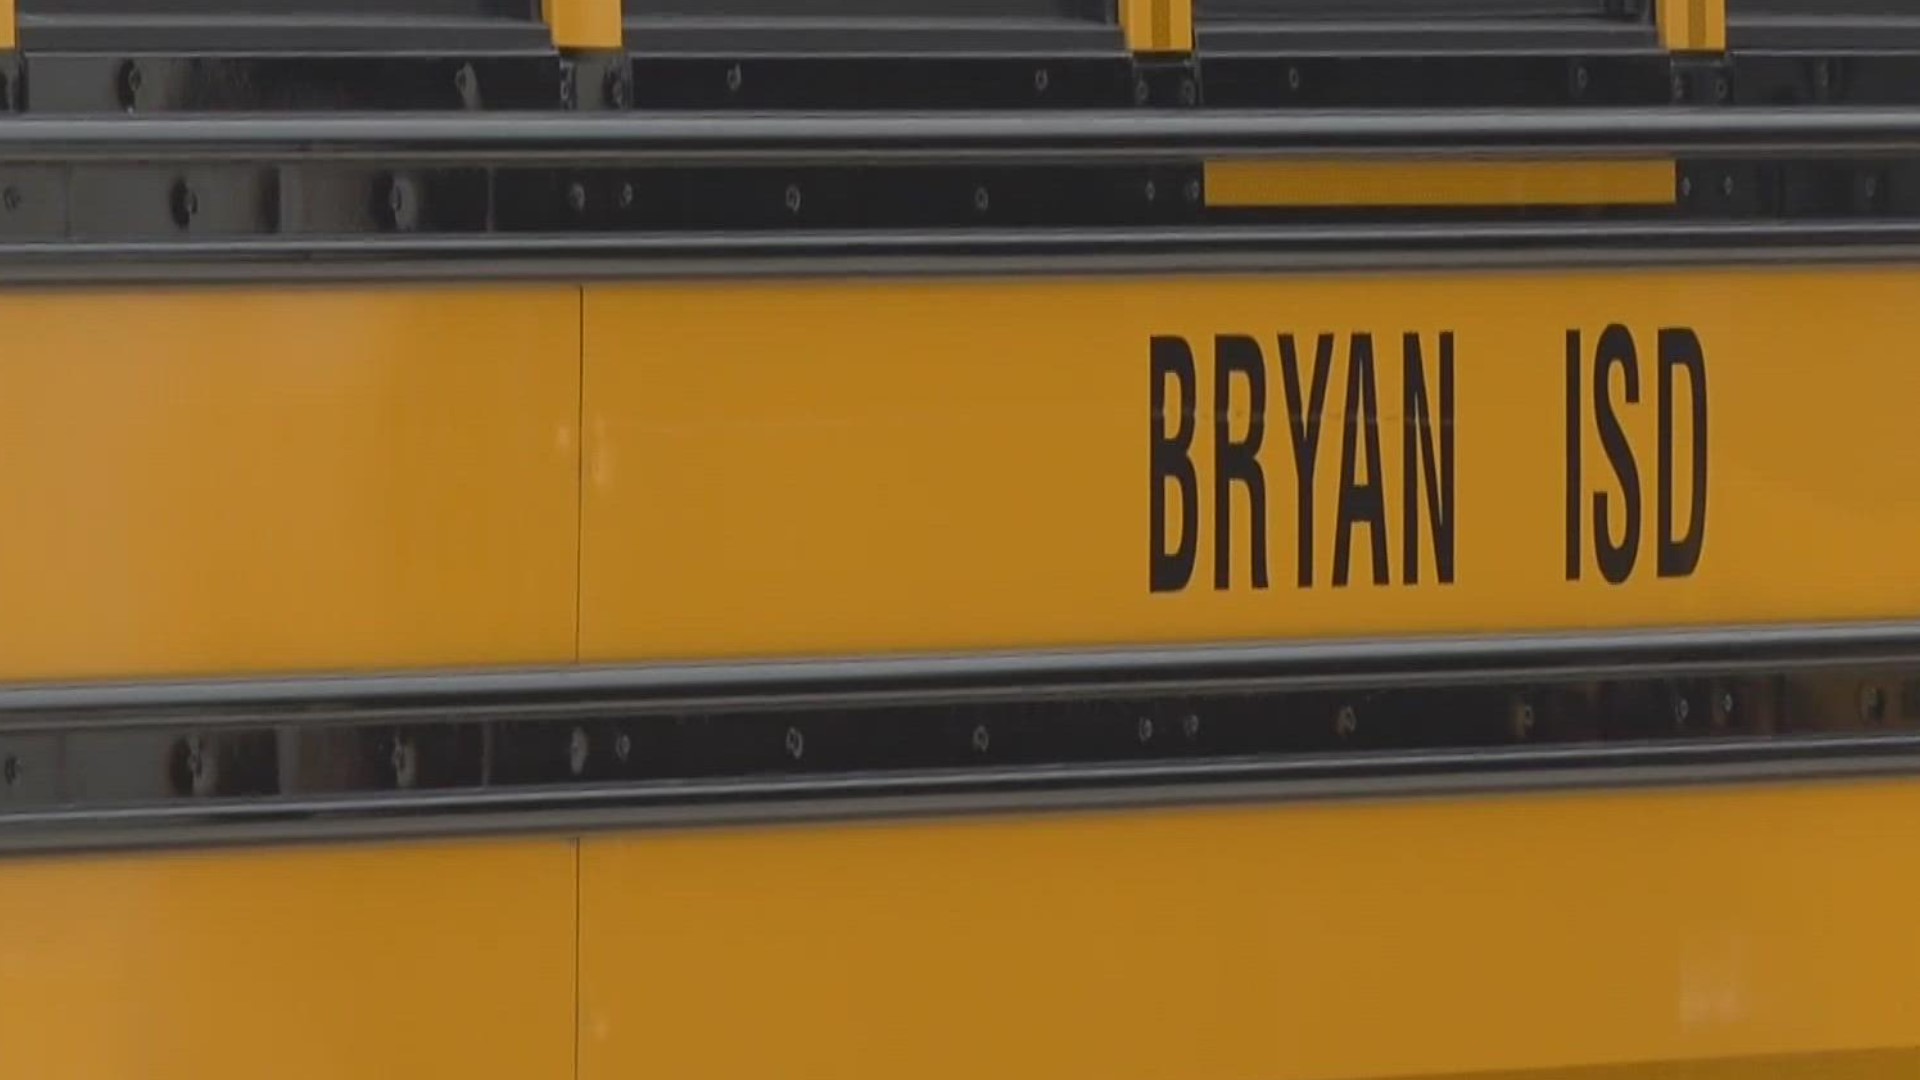 Bryan ISD's transportation staff is gearing up to accommodate the needs of all students, but with love they say.